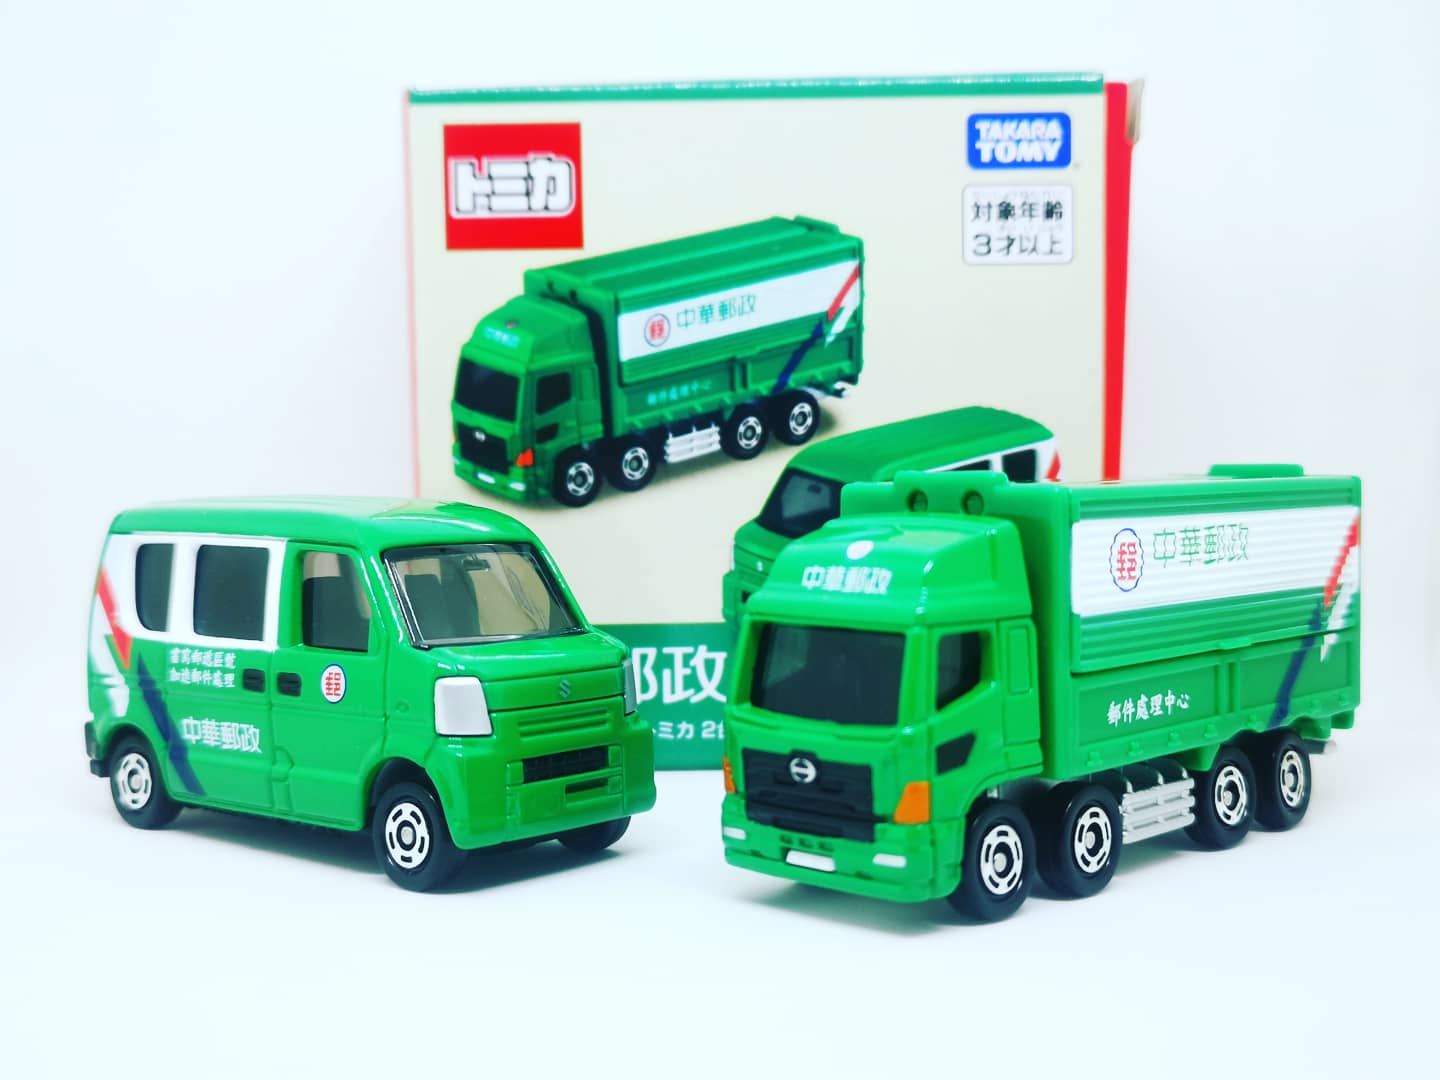 TOMICA Taiwan Chunghwa
(中華郵政) Post Official Exclusive item